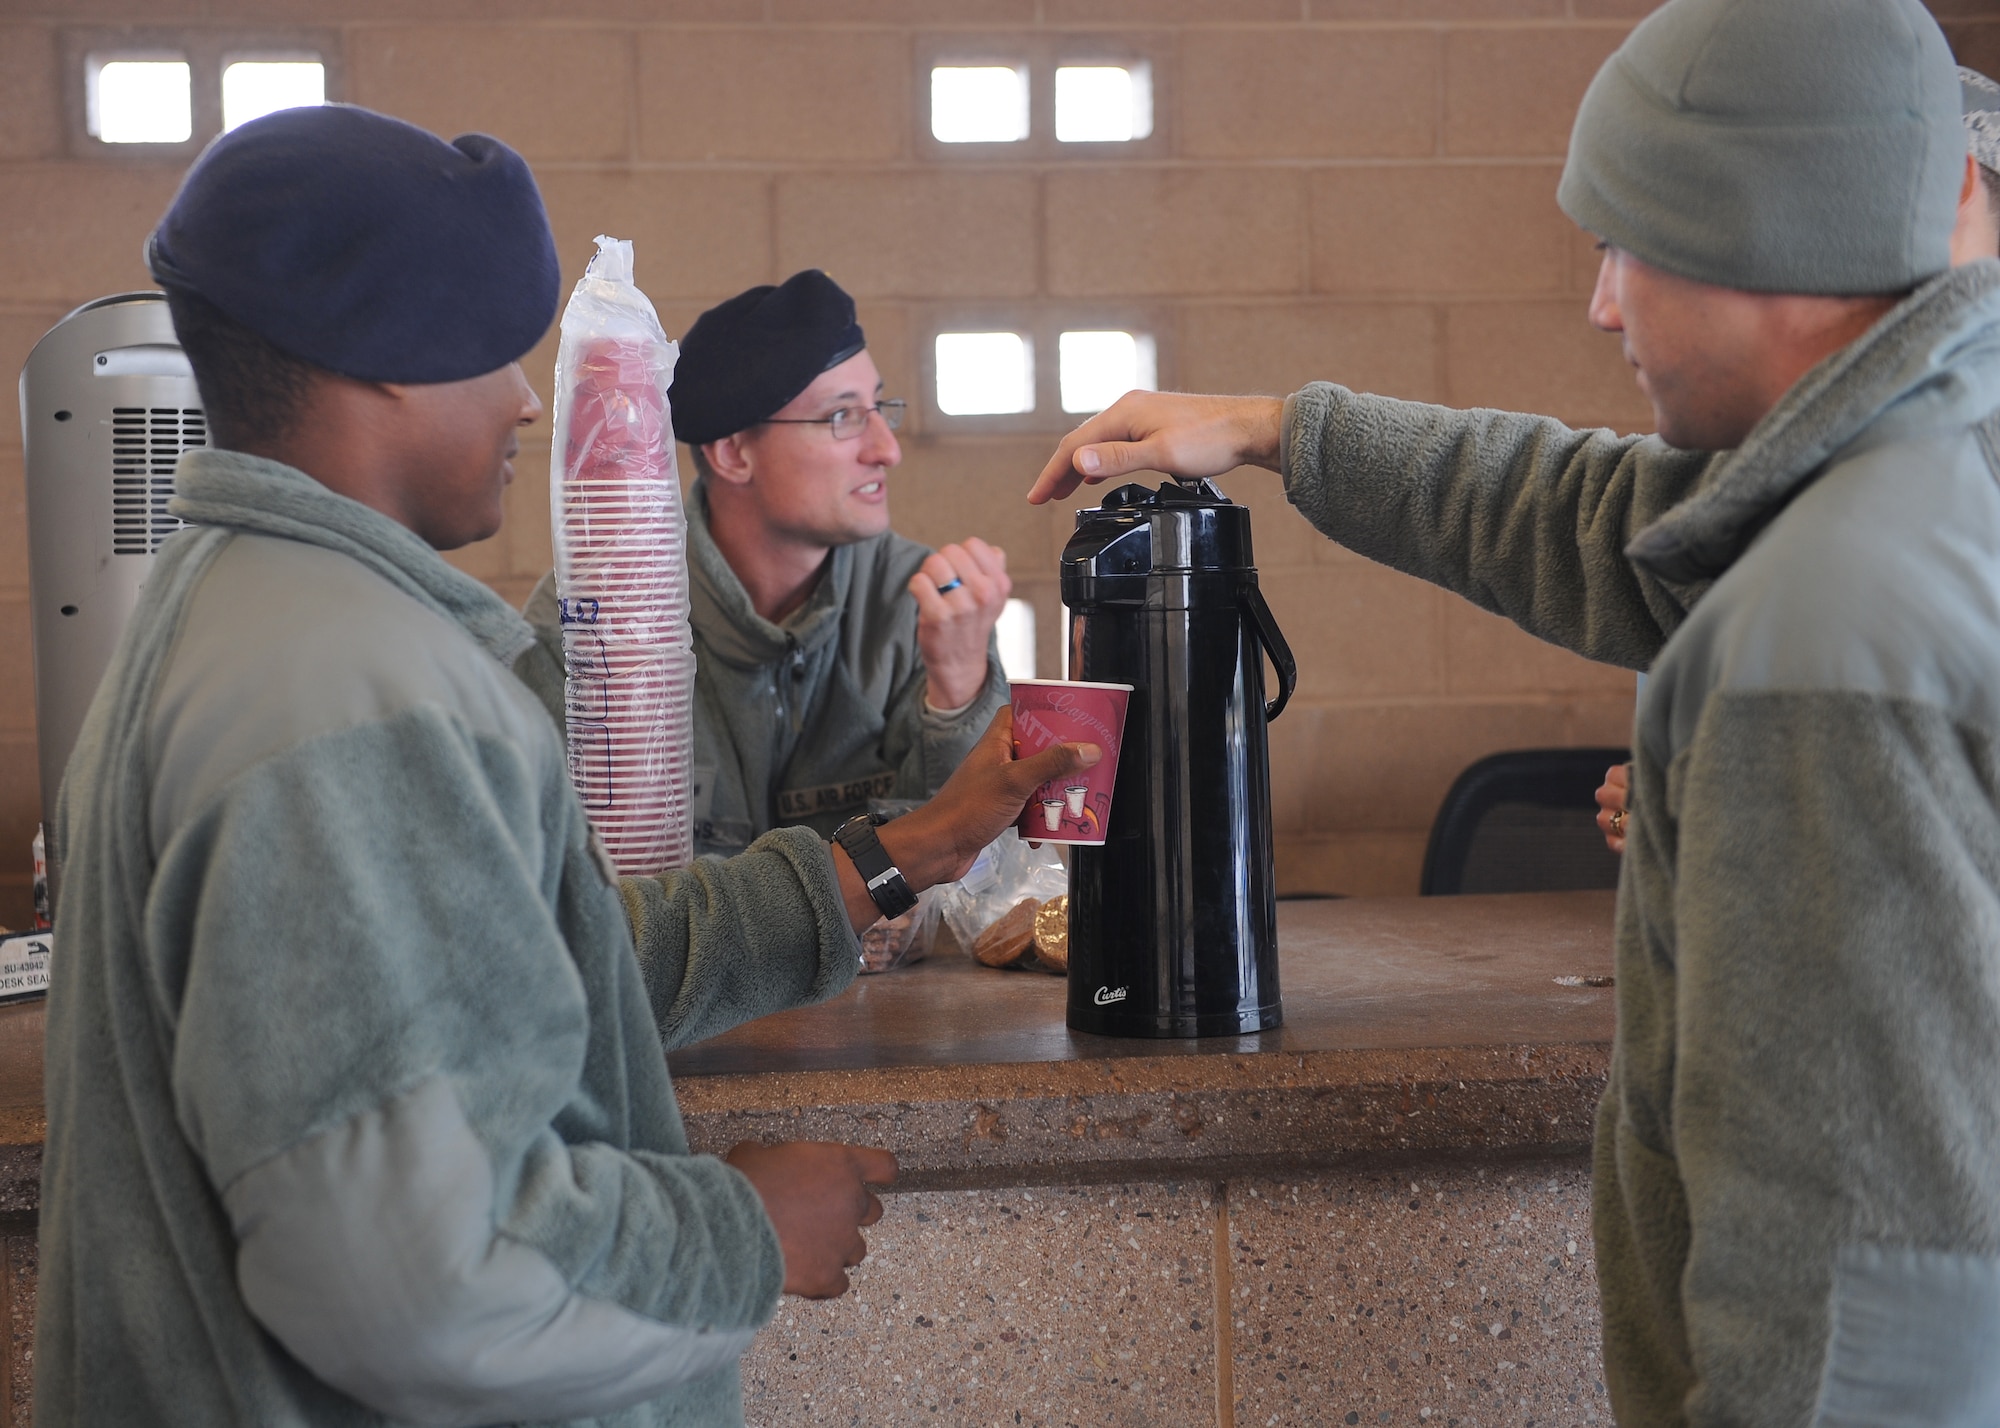 U.S. Air Force Chaplain (Capt.) Justin Szeker, 355th Fighter Wing chaplain, pours Airman 1st Class Michael Massey, 355th Security Forces Squadron, a cup of hot chocolate at Davis-Monthan Air Force Base, Ariz., Dec. 14, 2015. The hot chocolate was provided by the Chaplain Corps and distributed to all SFS Airmen working at entry control points around D-M. (U.S. Air Force photo by Senior Airman Cheyenne A. Powers/ Released)
